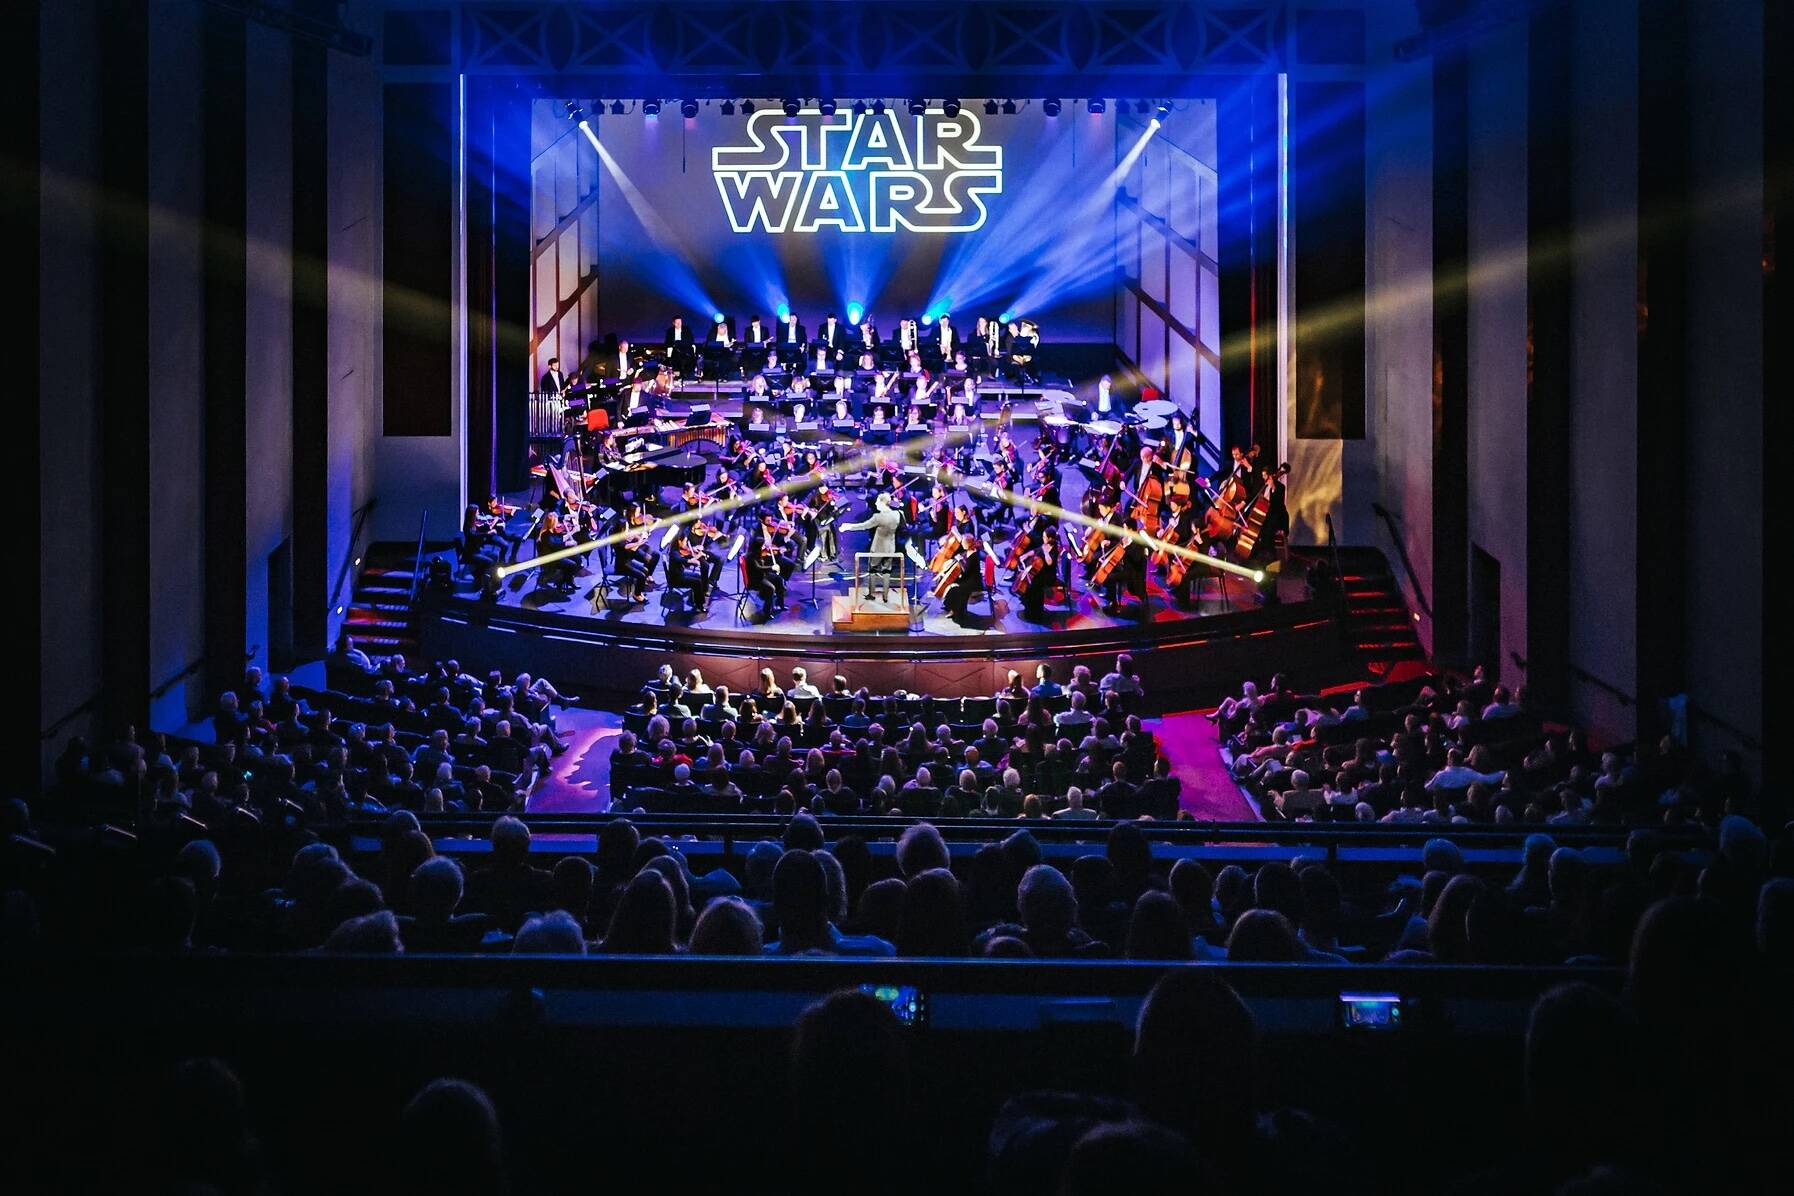 The Owensboro Symphony performs works from “Star Wars” during a concert conducted by Troy Quinn in 2018. Quinn has conducted “A Night at the Oscars” concerts with multiple ensembles with a range of visiting musicians. The Juneau performances on June 11 and 12 are scheduled to feature numerous musicians from Los Angeles who participated in the recording of the music for the original films. (Courtesy of Troy Quinn)